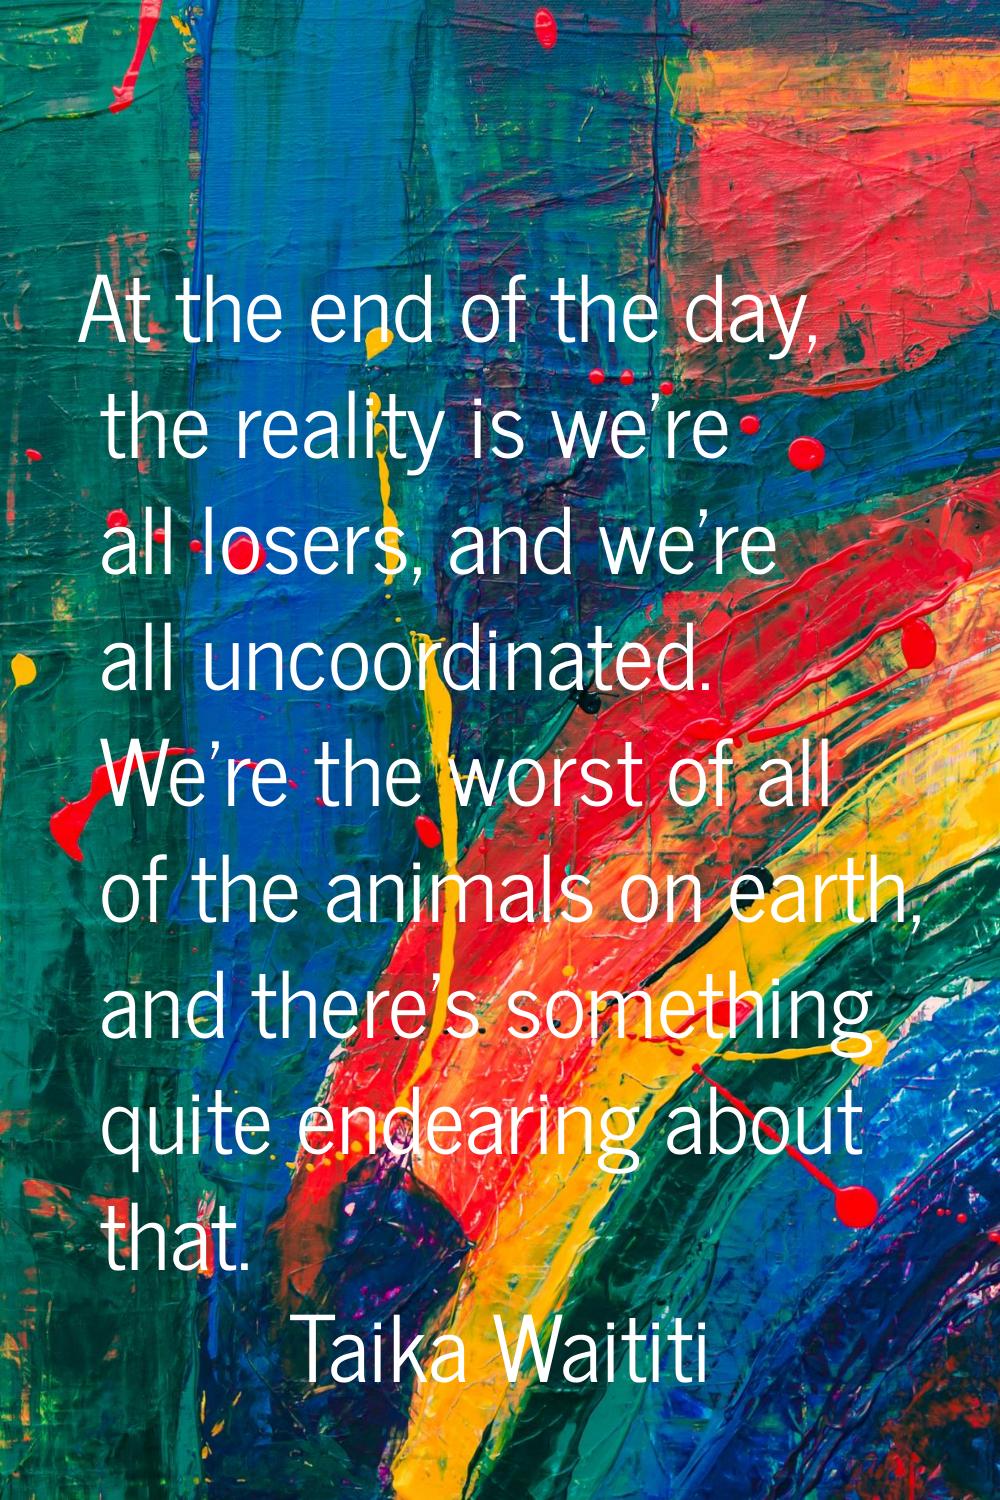 At the end of the day, the reality is we're all losers, and we're all uncoordinated. We're the wors